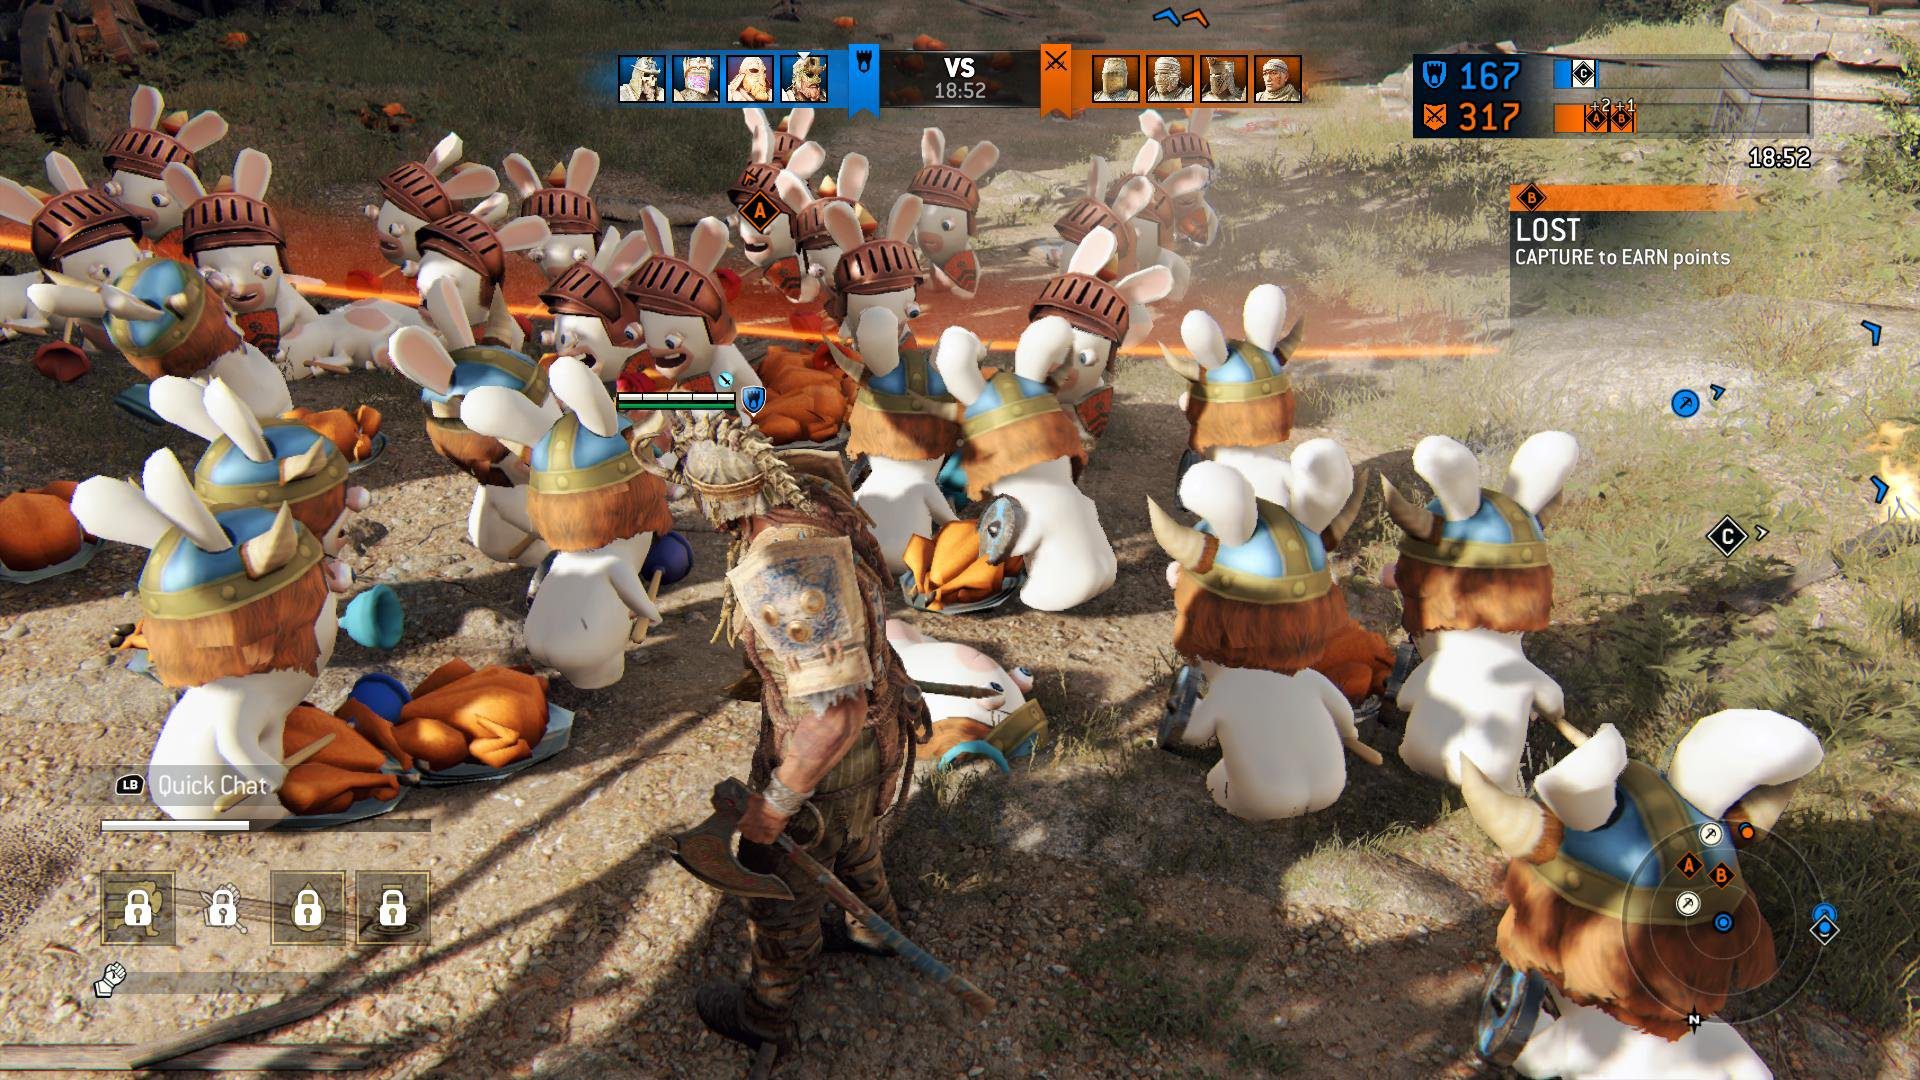 The Rabbids invade For Honor